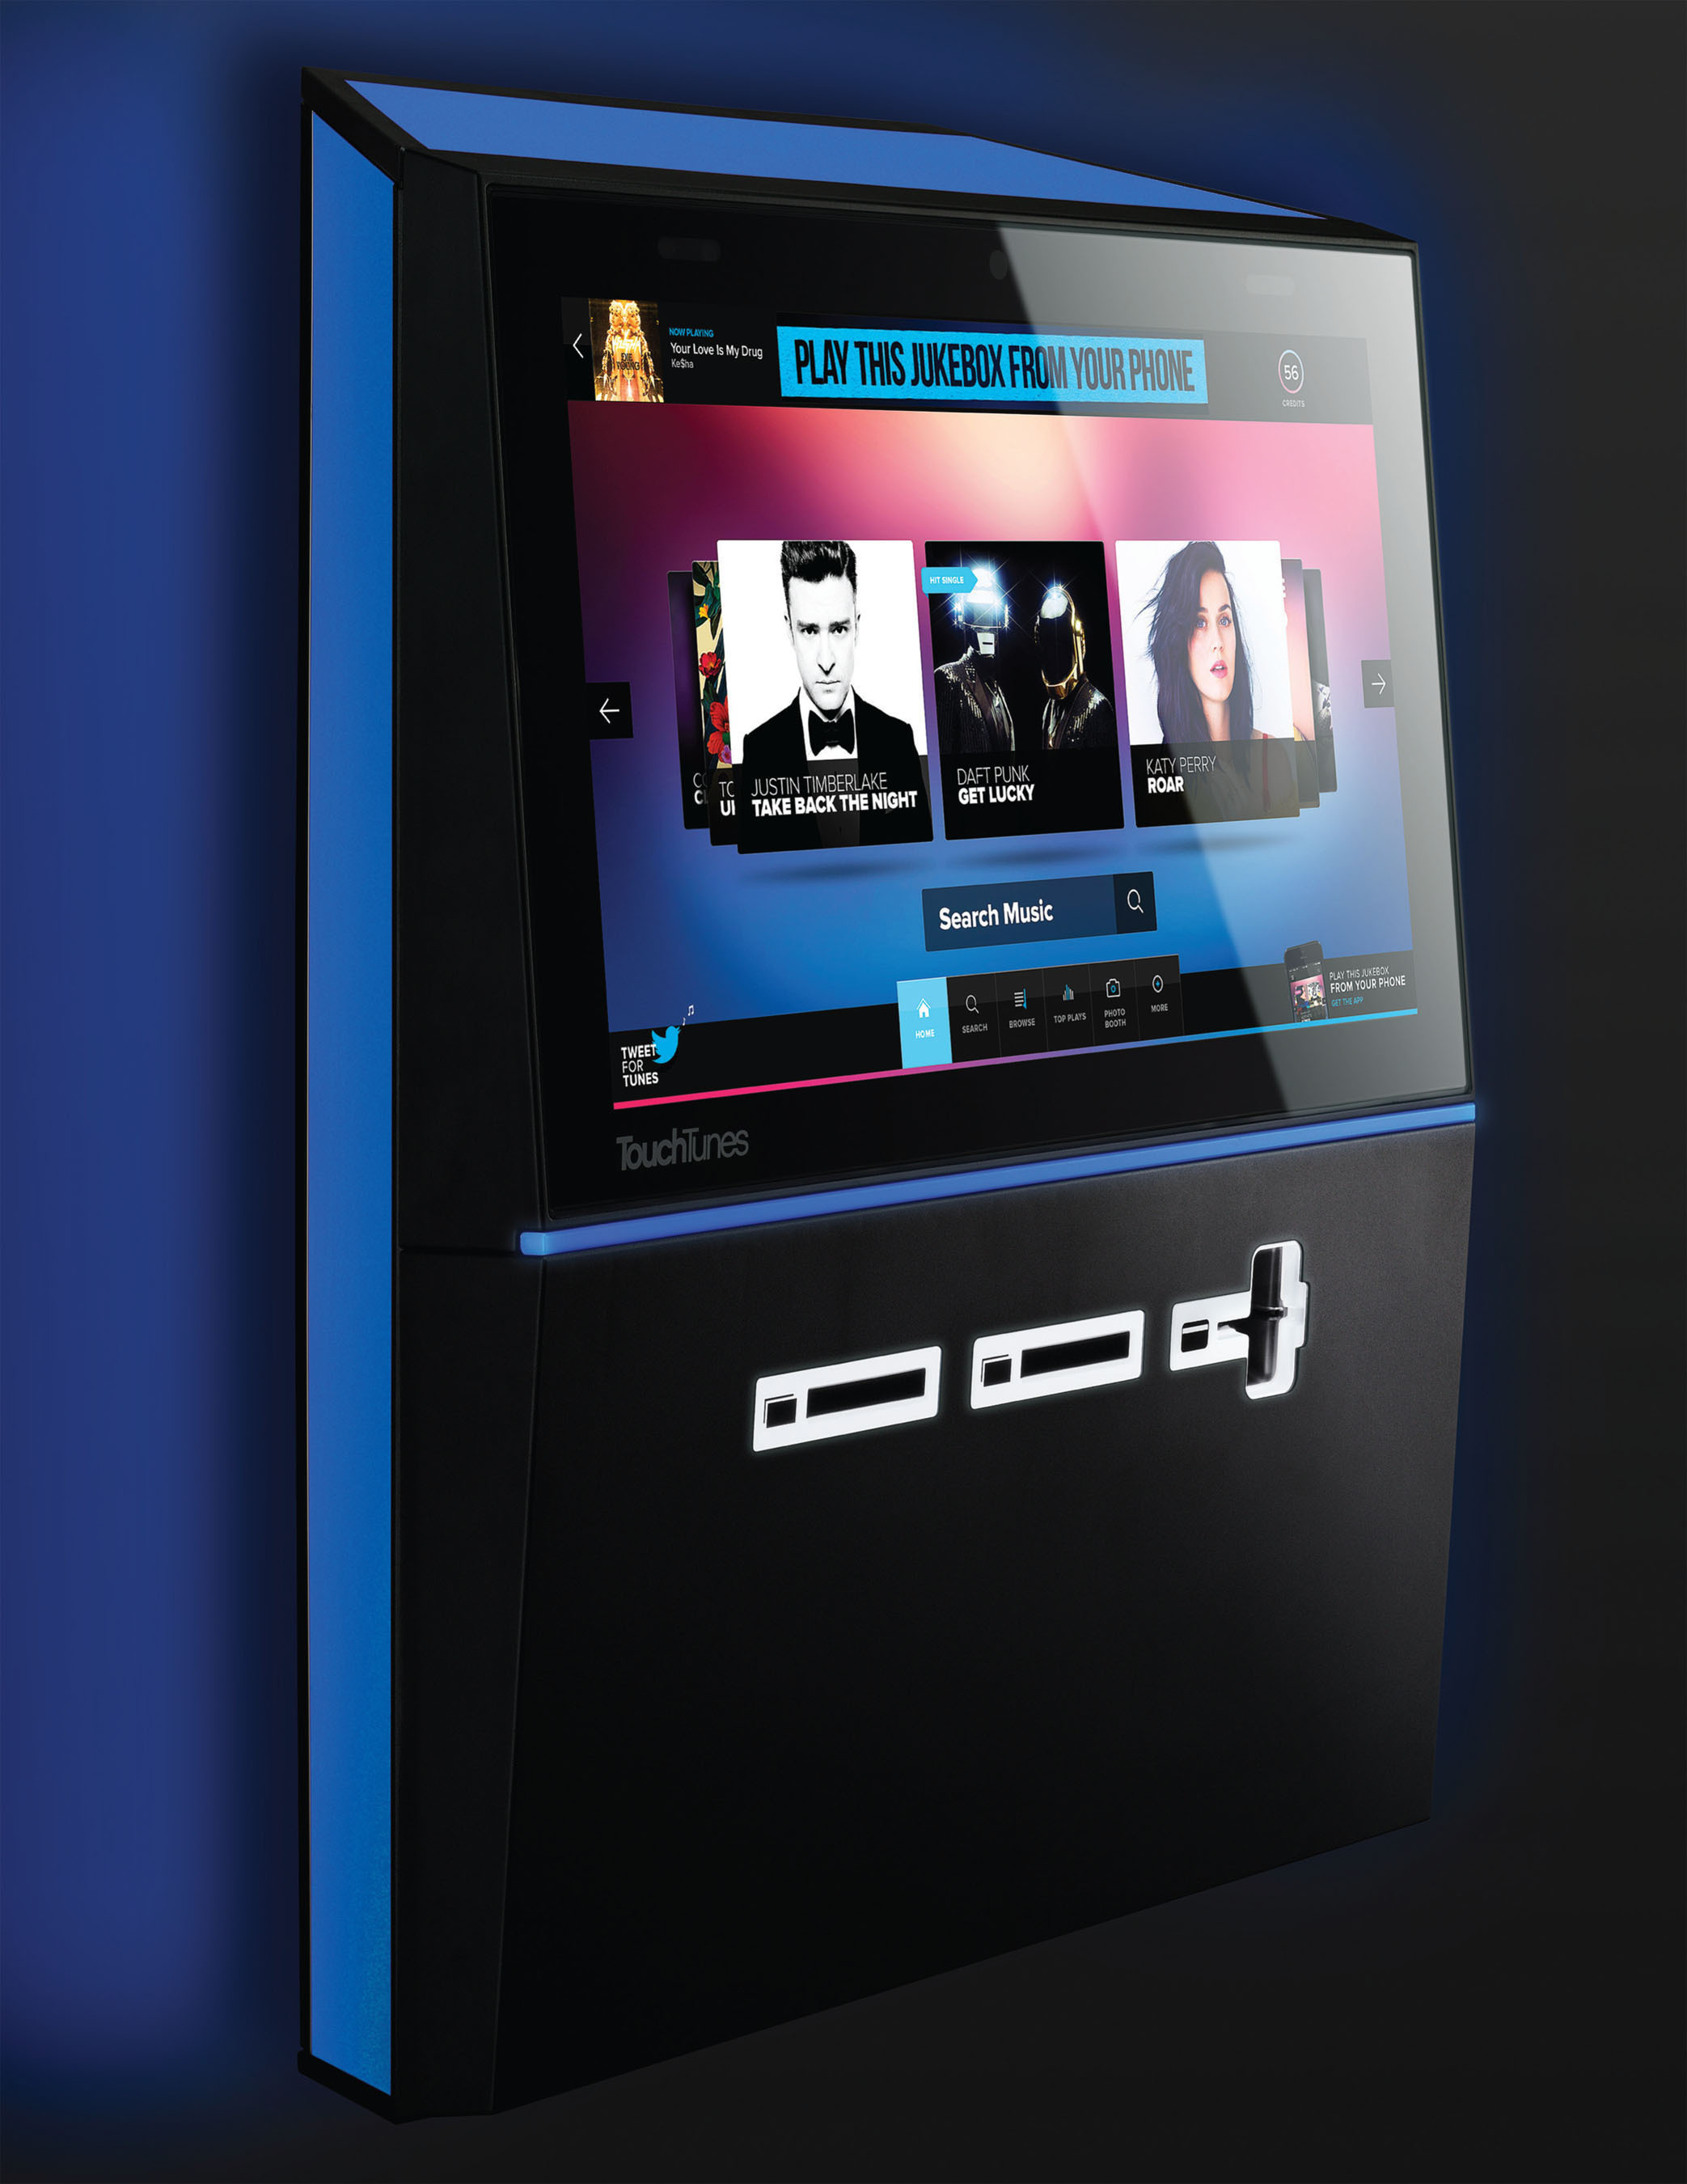 TouchTunes, the largest in-venue interactive entertainment network in North America, today announced Playdium, a next-generation entertainment platform that redefines the possibilities for new and engaging user experiences. Playdium combines a revolutionary new music experience that allows the jukebox to reflect the unique musical taste of each venue with a sleek, modular design. Playdium also supports the leading TouchTunes mobile app, and integrated Karaoke and PhotoBooth. (PRNewsFoto/TouchTunes) (PRNewsFoto/TOUCHTUNES)